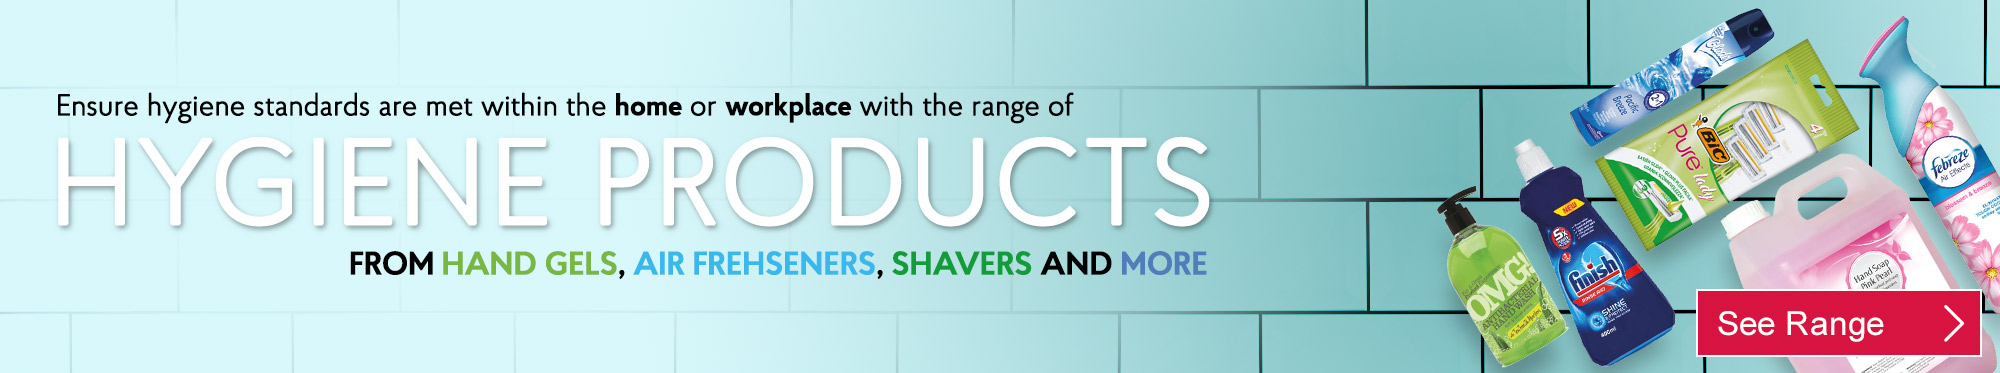 Ensure hygiene standards are met within the home or workplace with the range of Hygiene Products